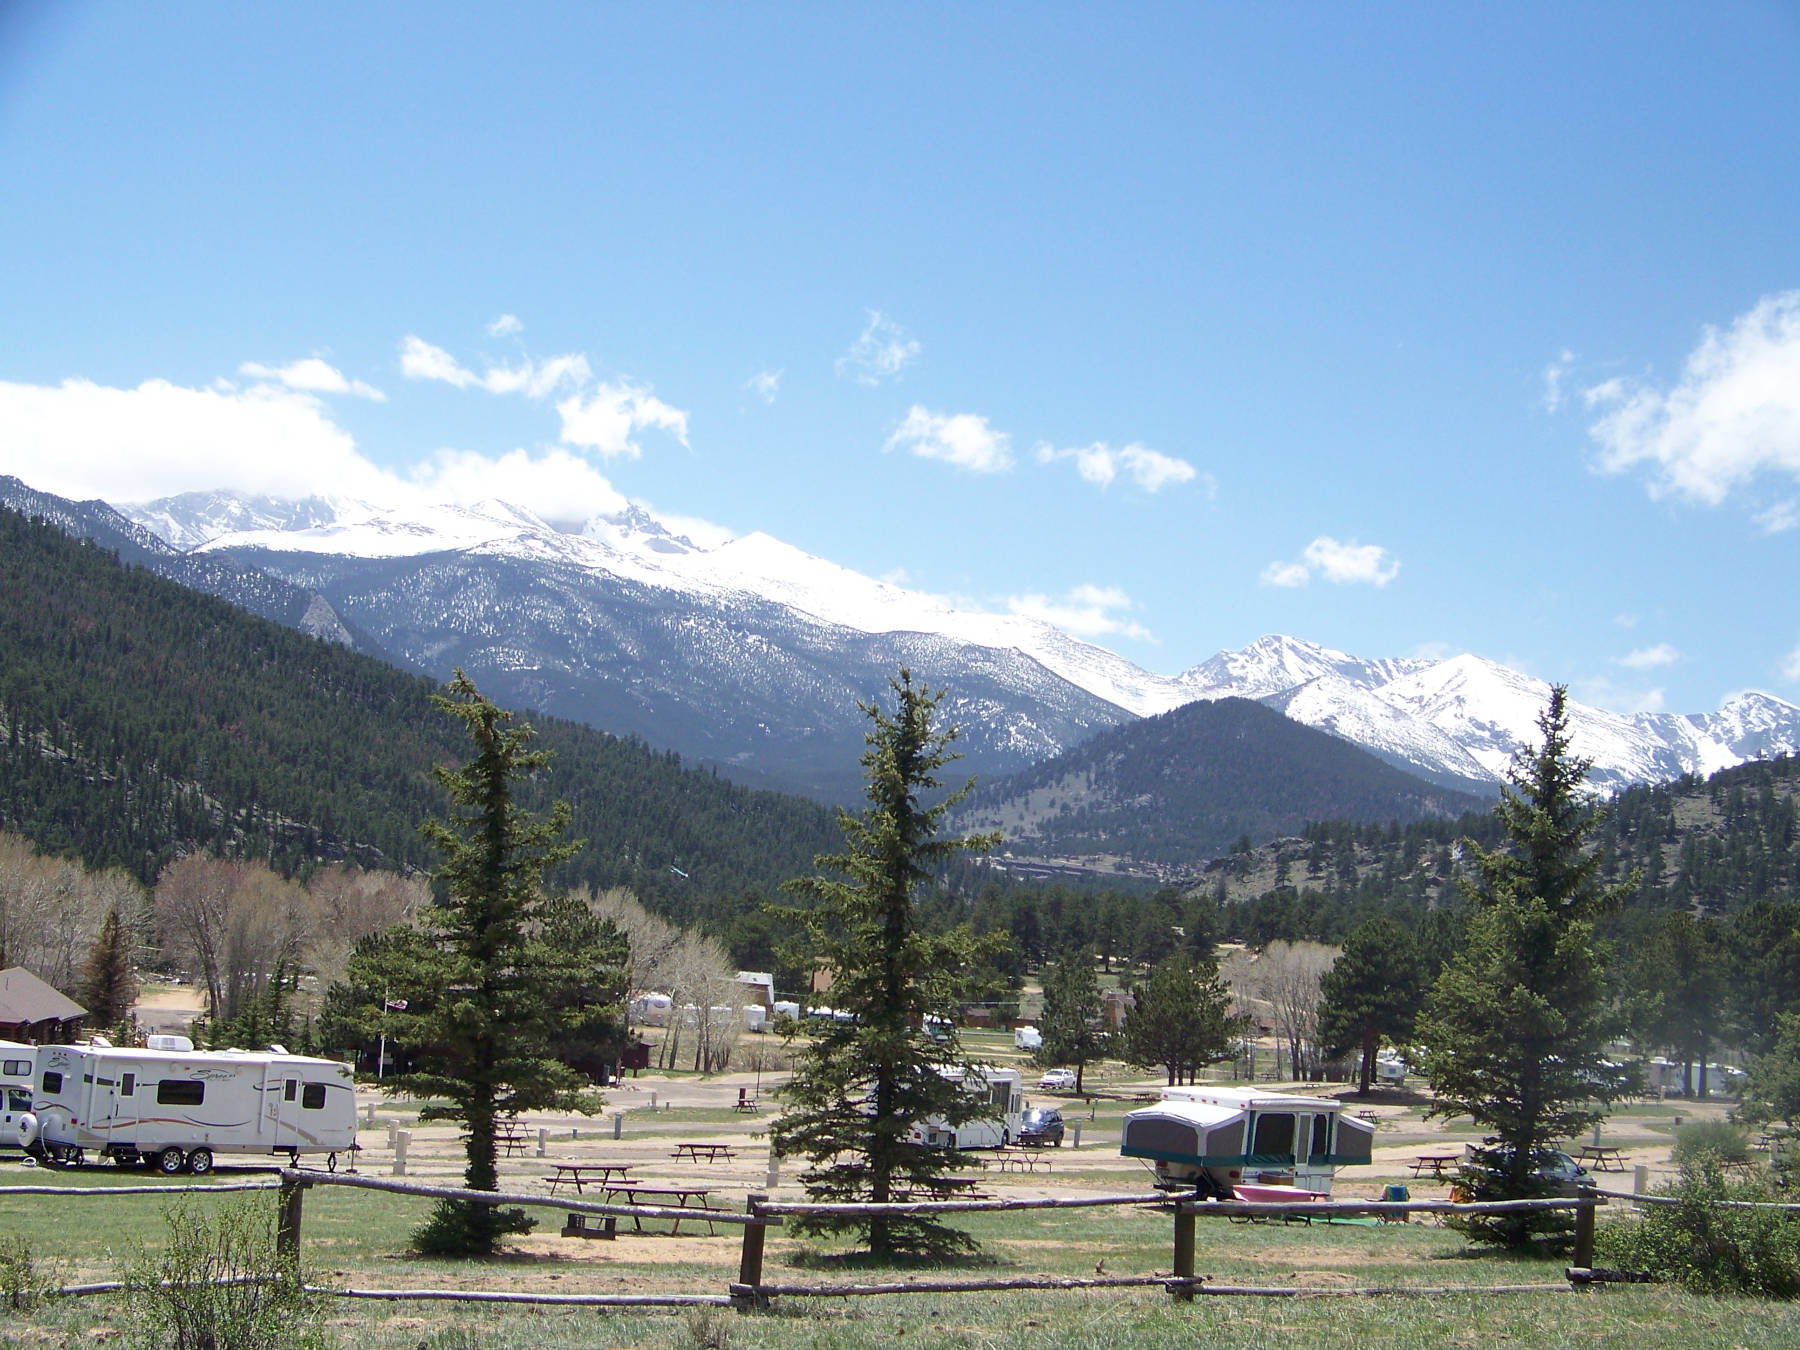 Snow capped mountain peaks in Rocky Mountain National Park viewed from an RV resort near Estes Park CO